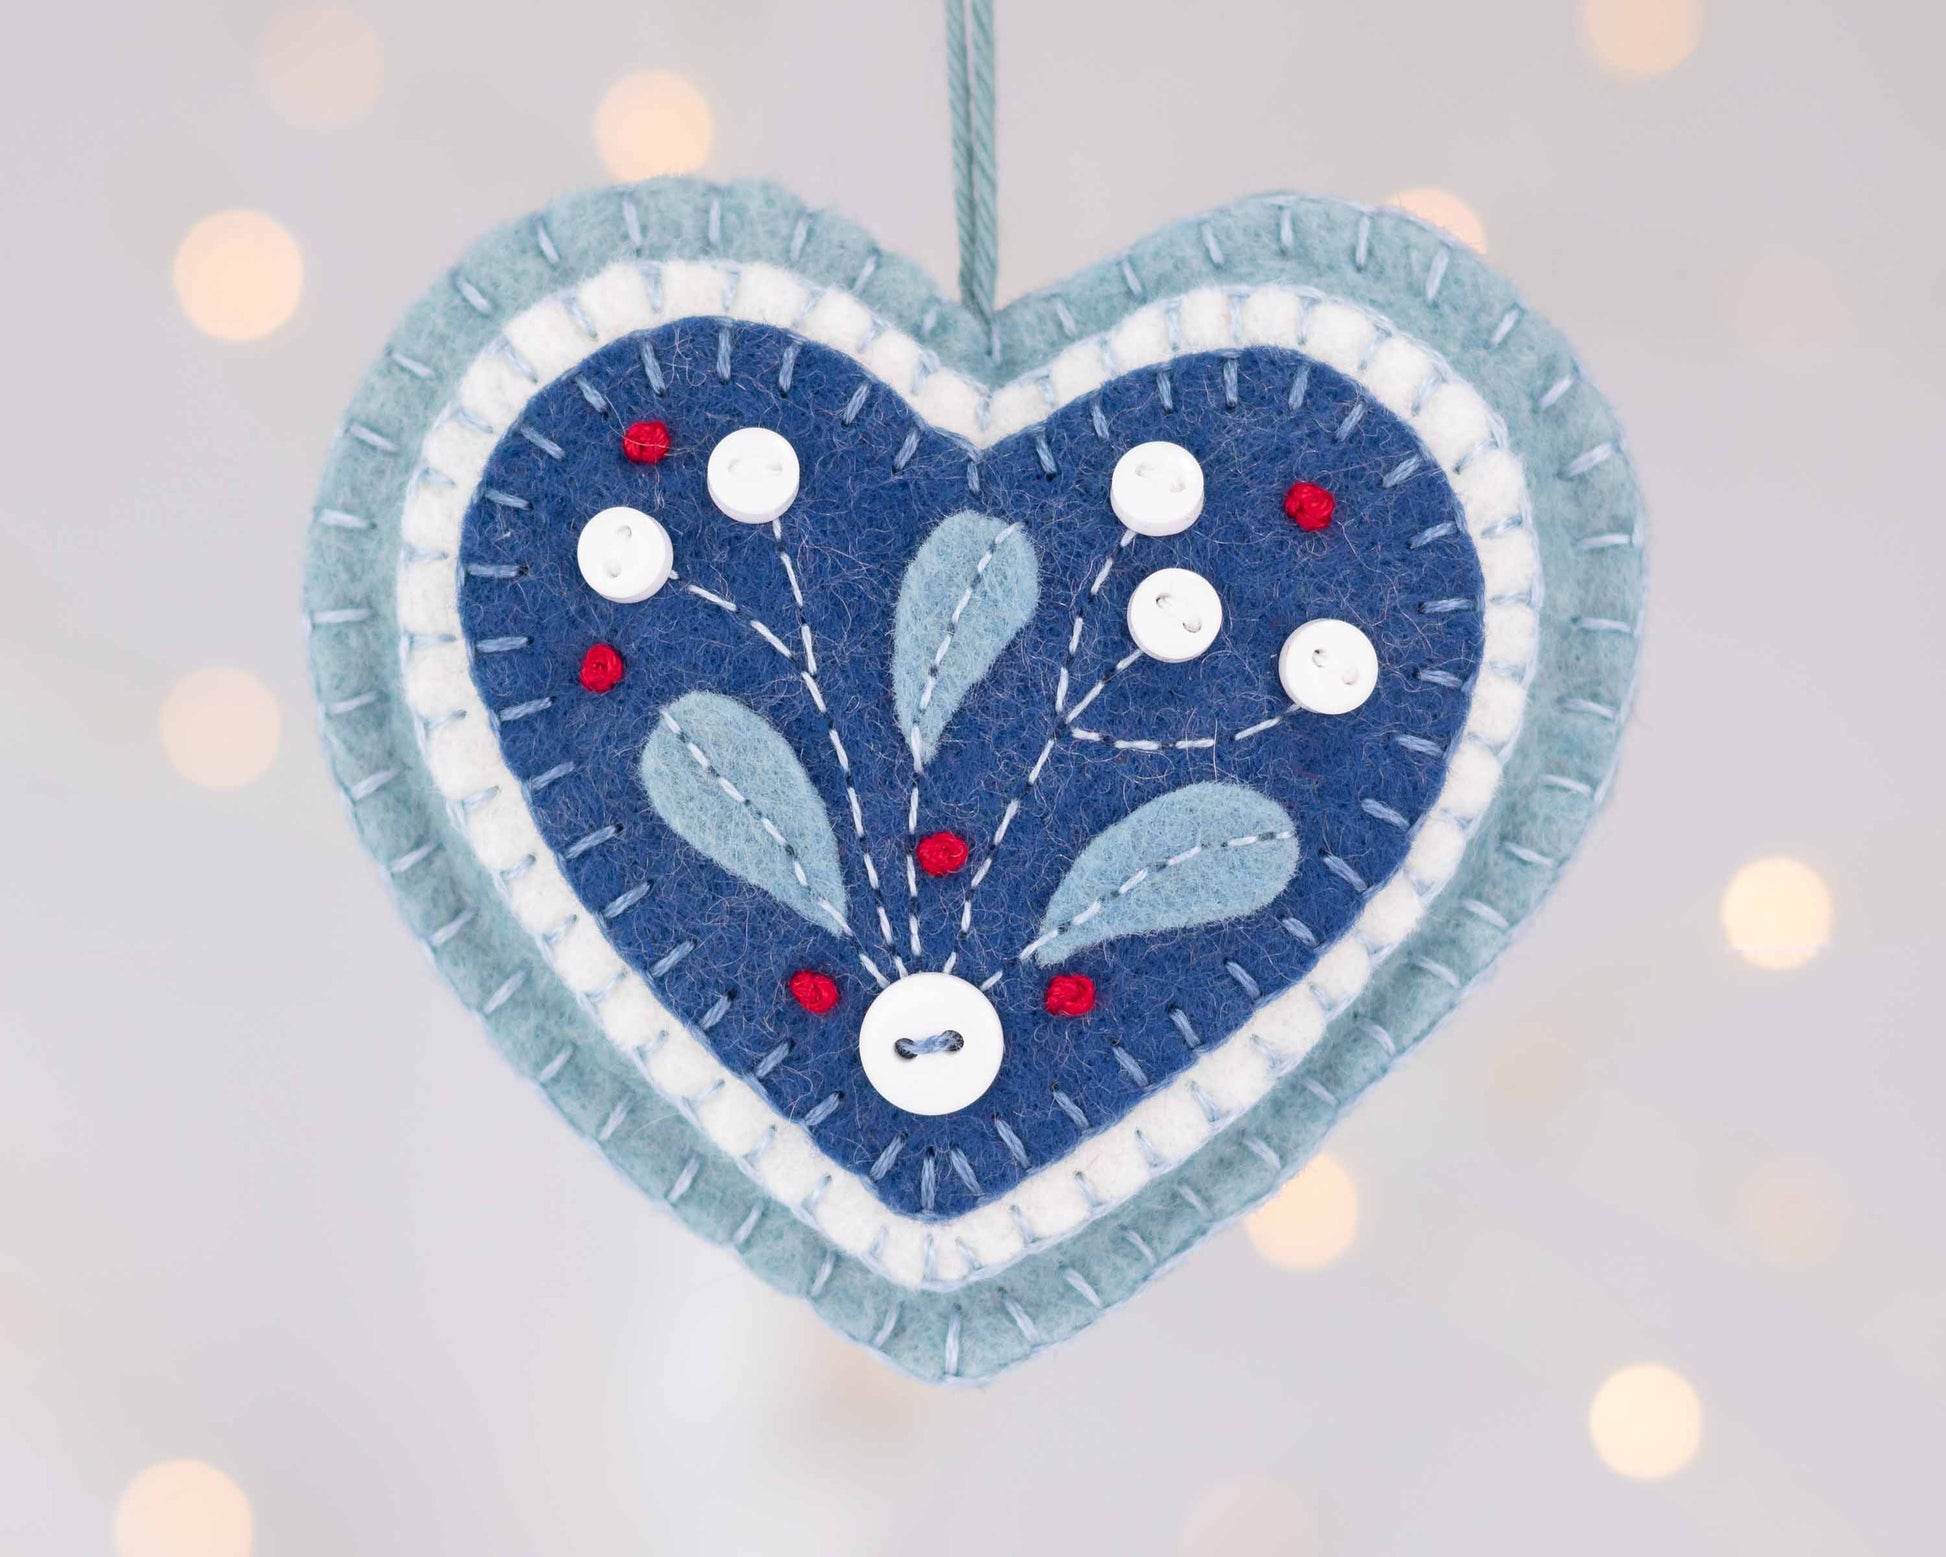 Felt Heart Ornaments with Berries